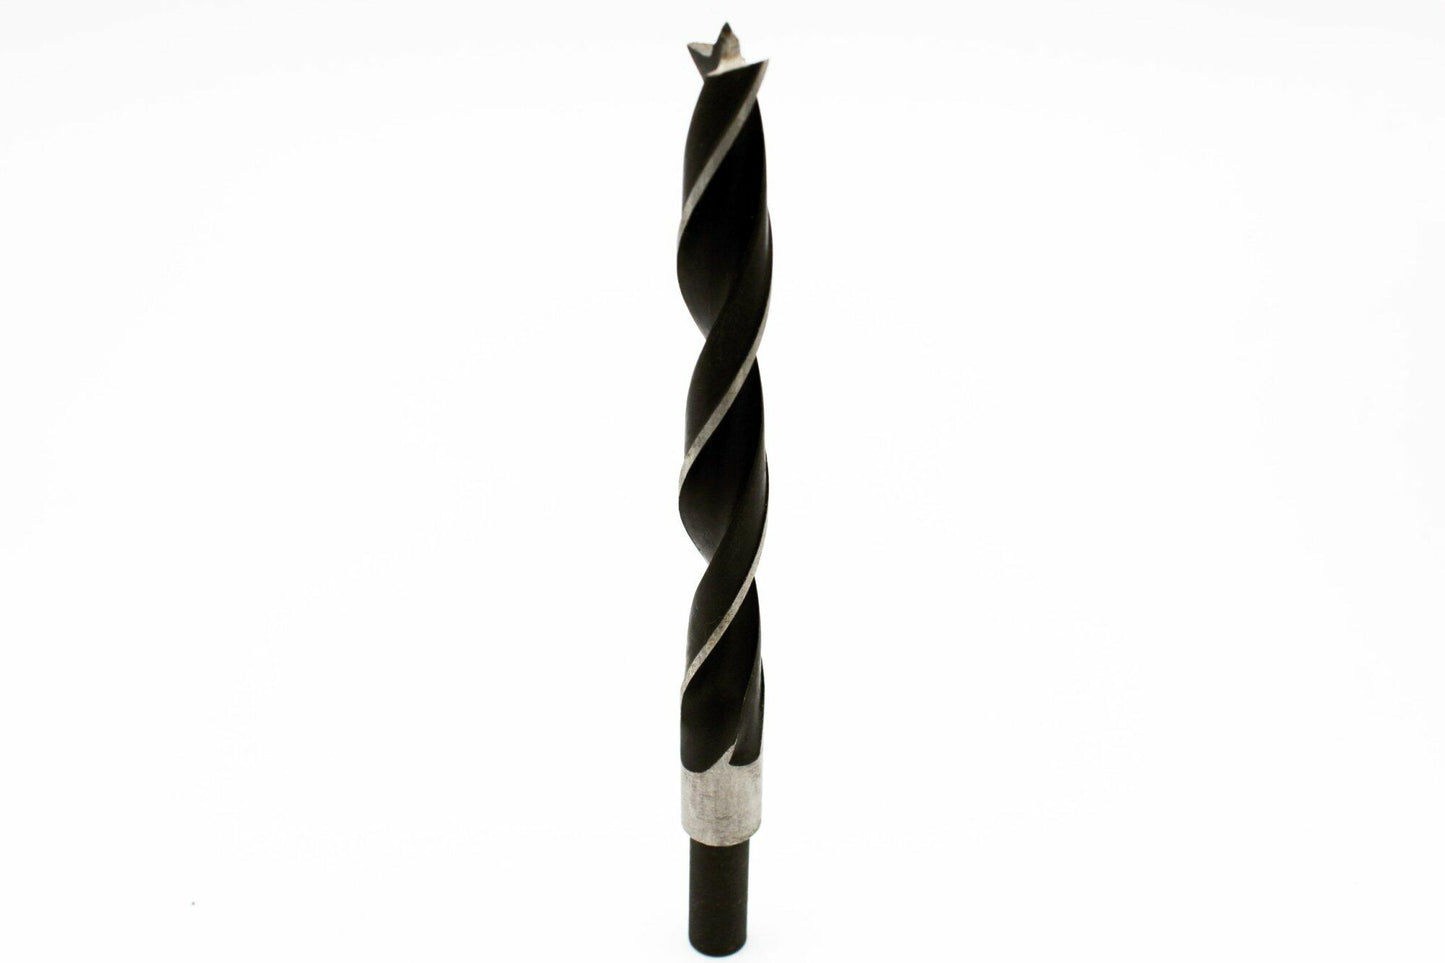 fluted shank self centering drill bit shown vertically that is used for drilling into wood